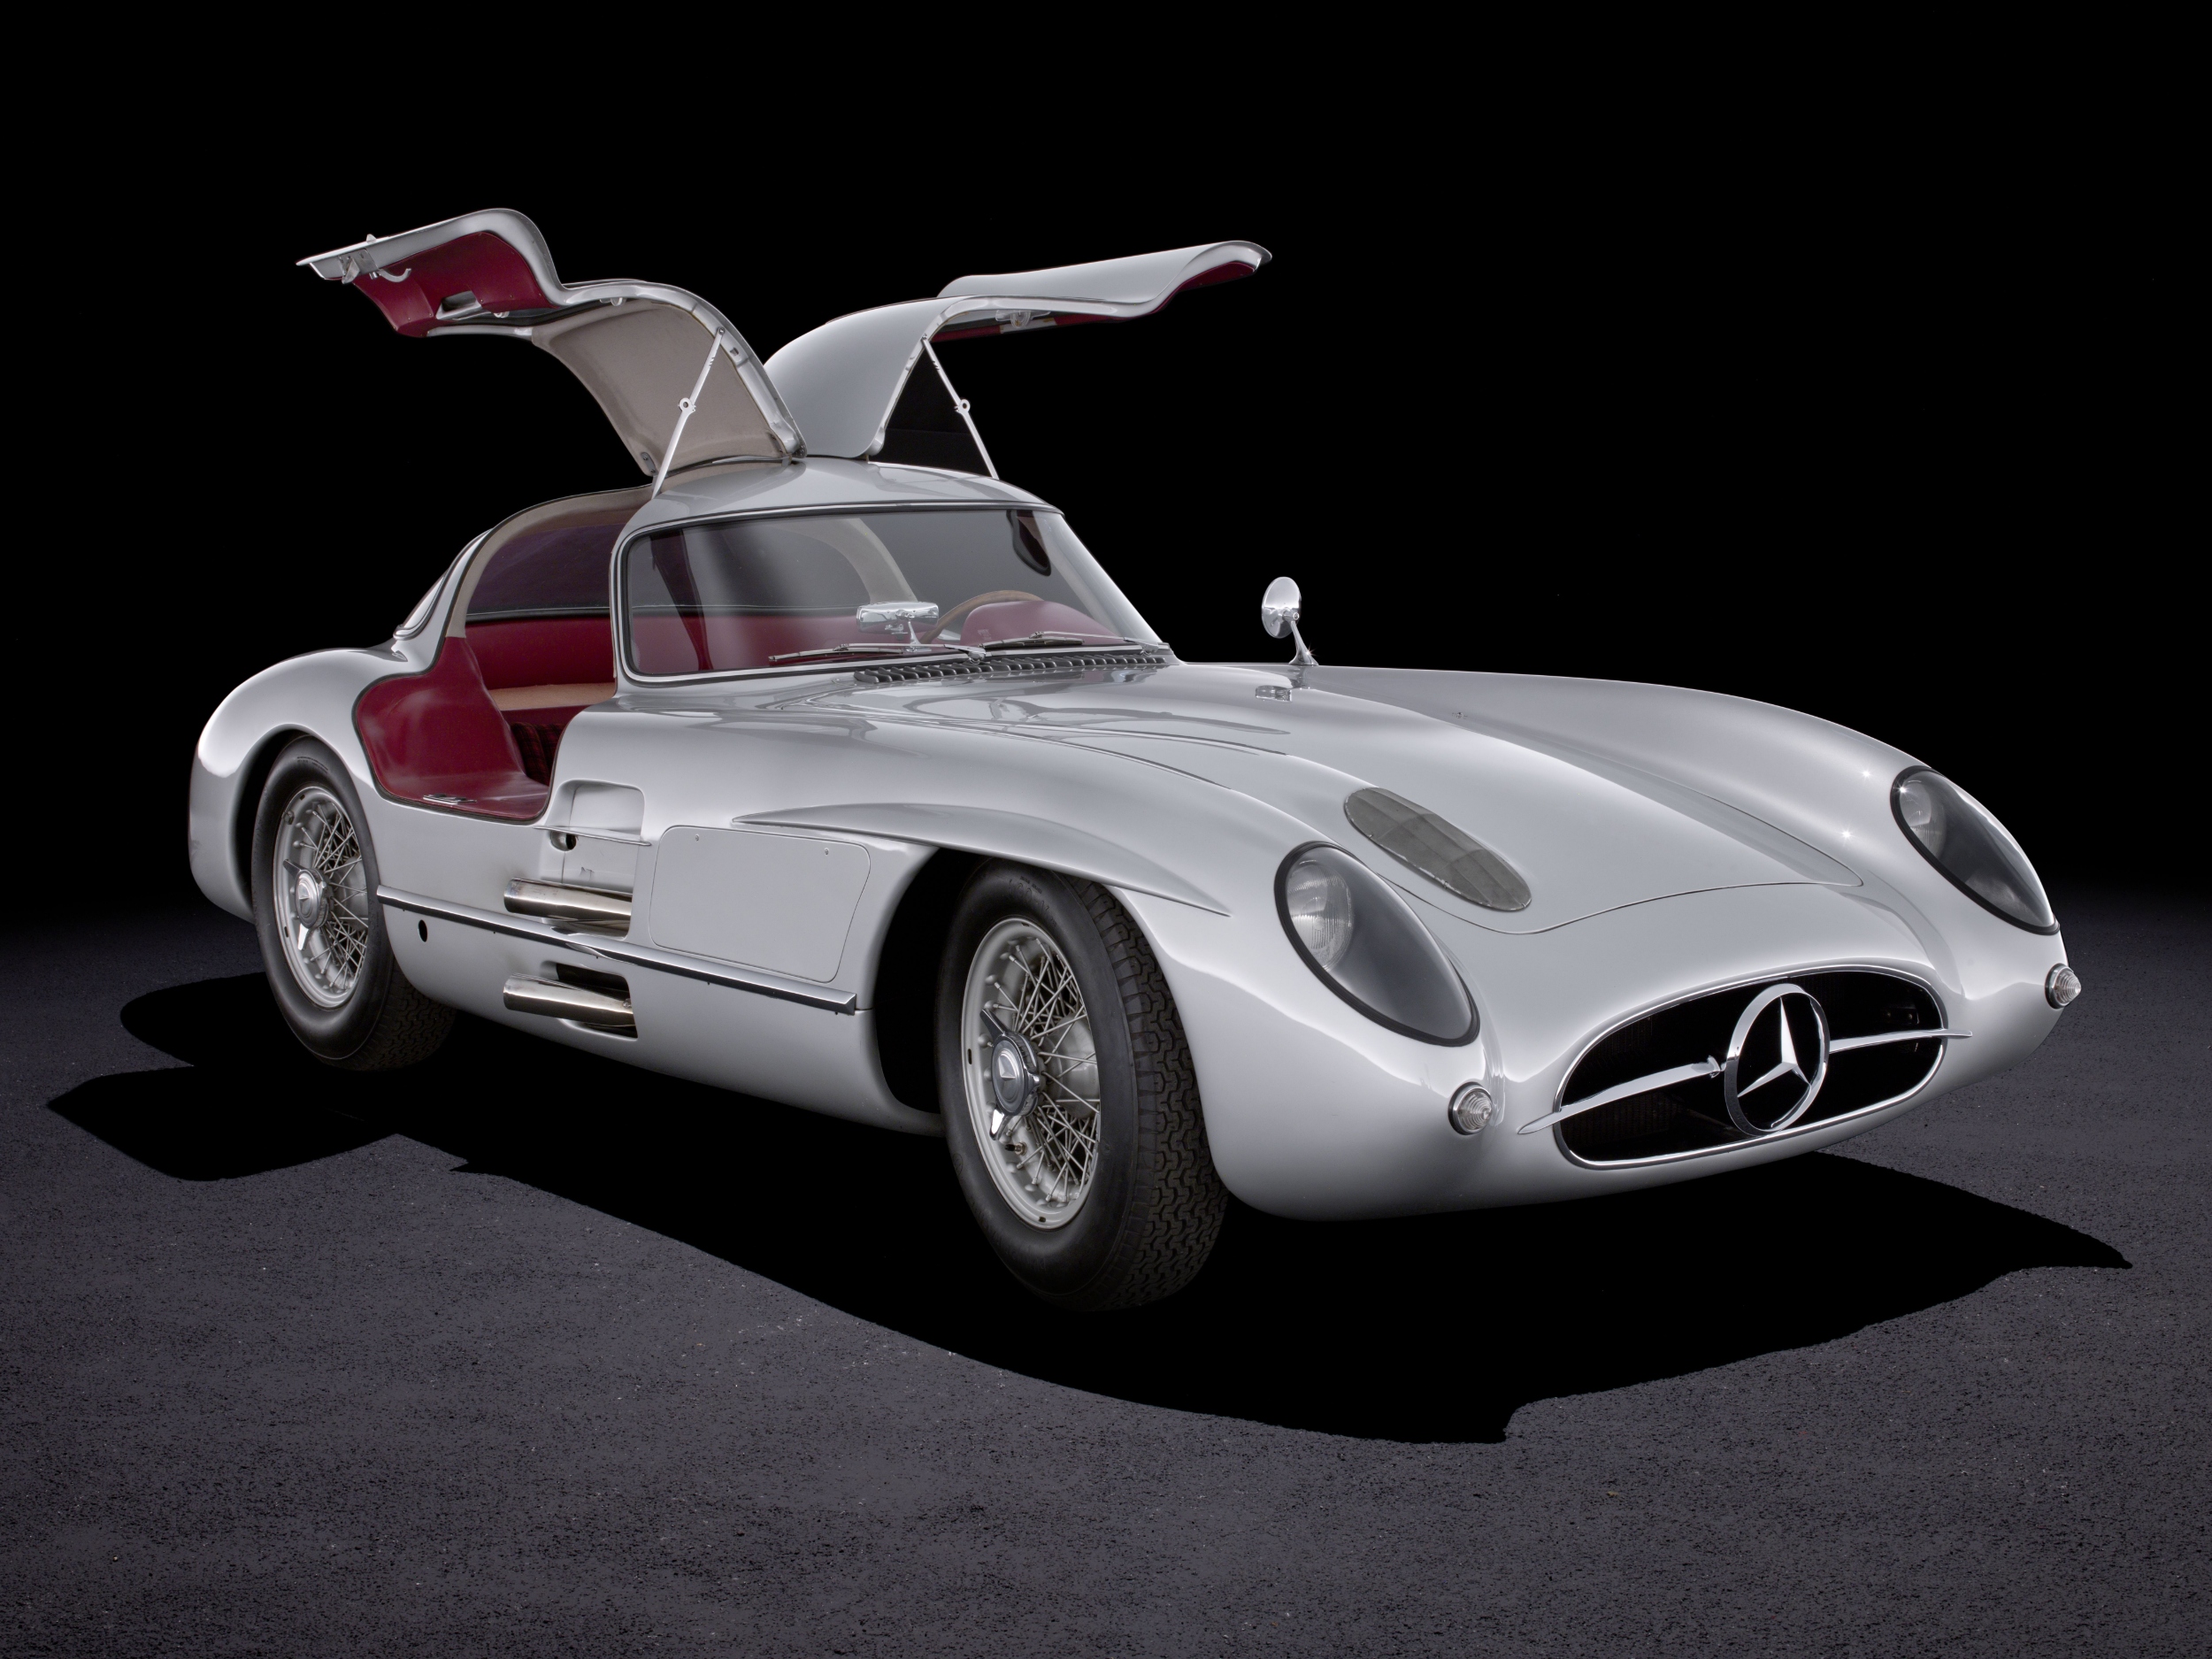 Sotheby’s Just Sold The Most Valuable Car In The World